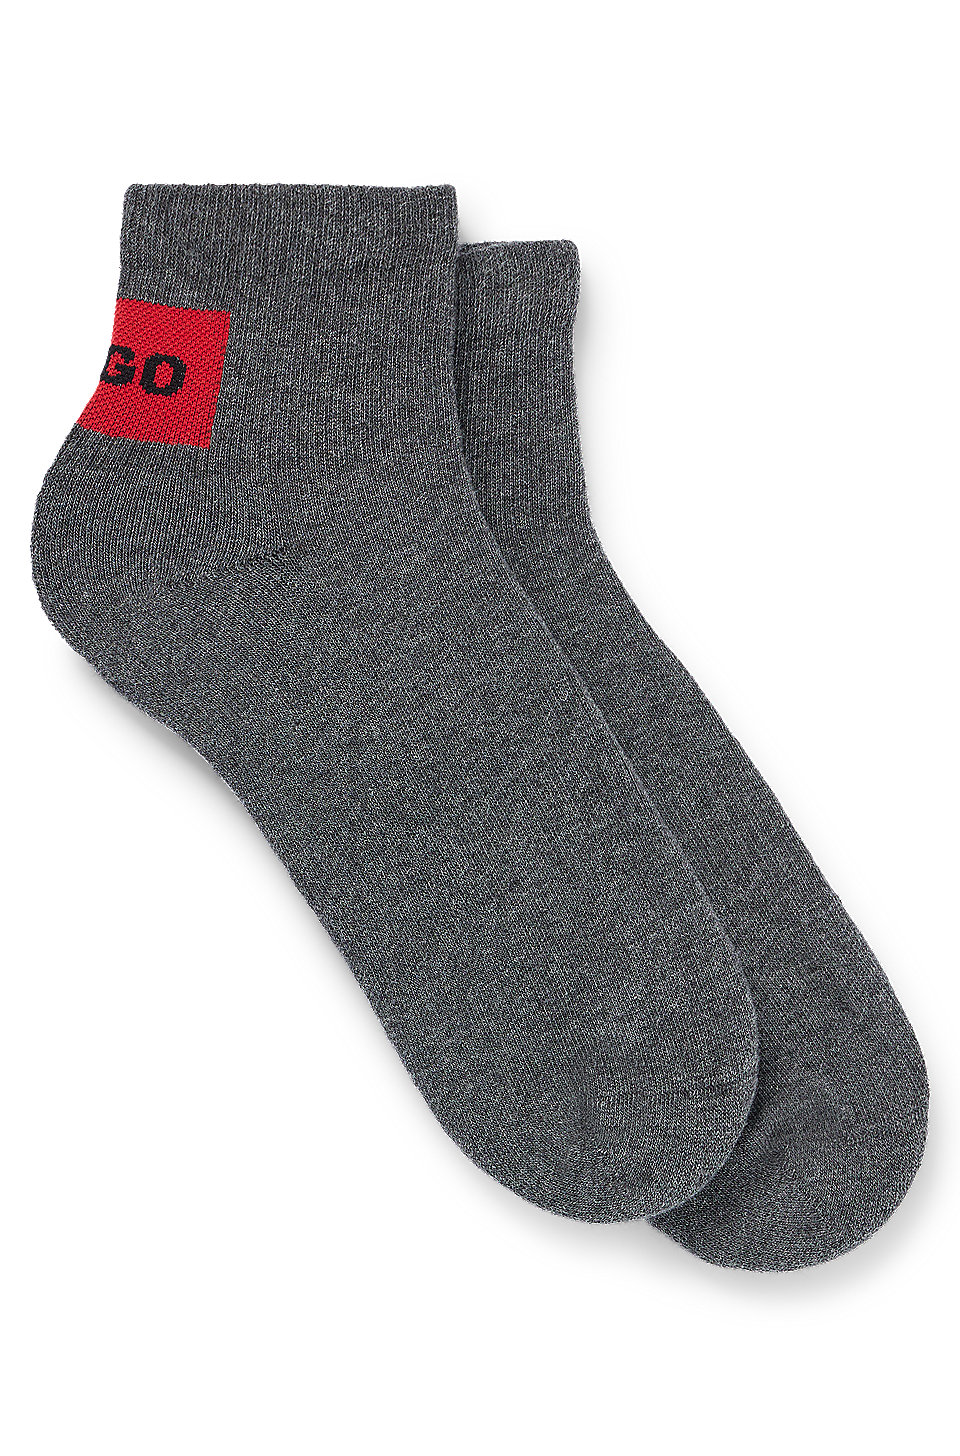 HUGO - Two-pack of short socks with red logo label